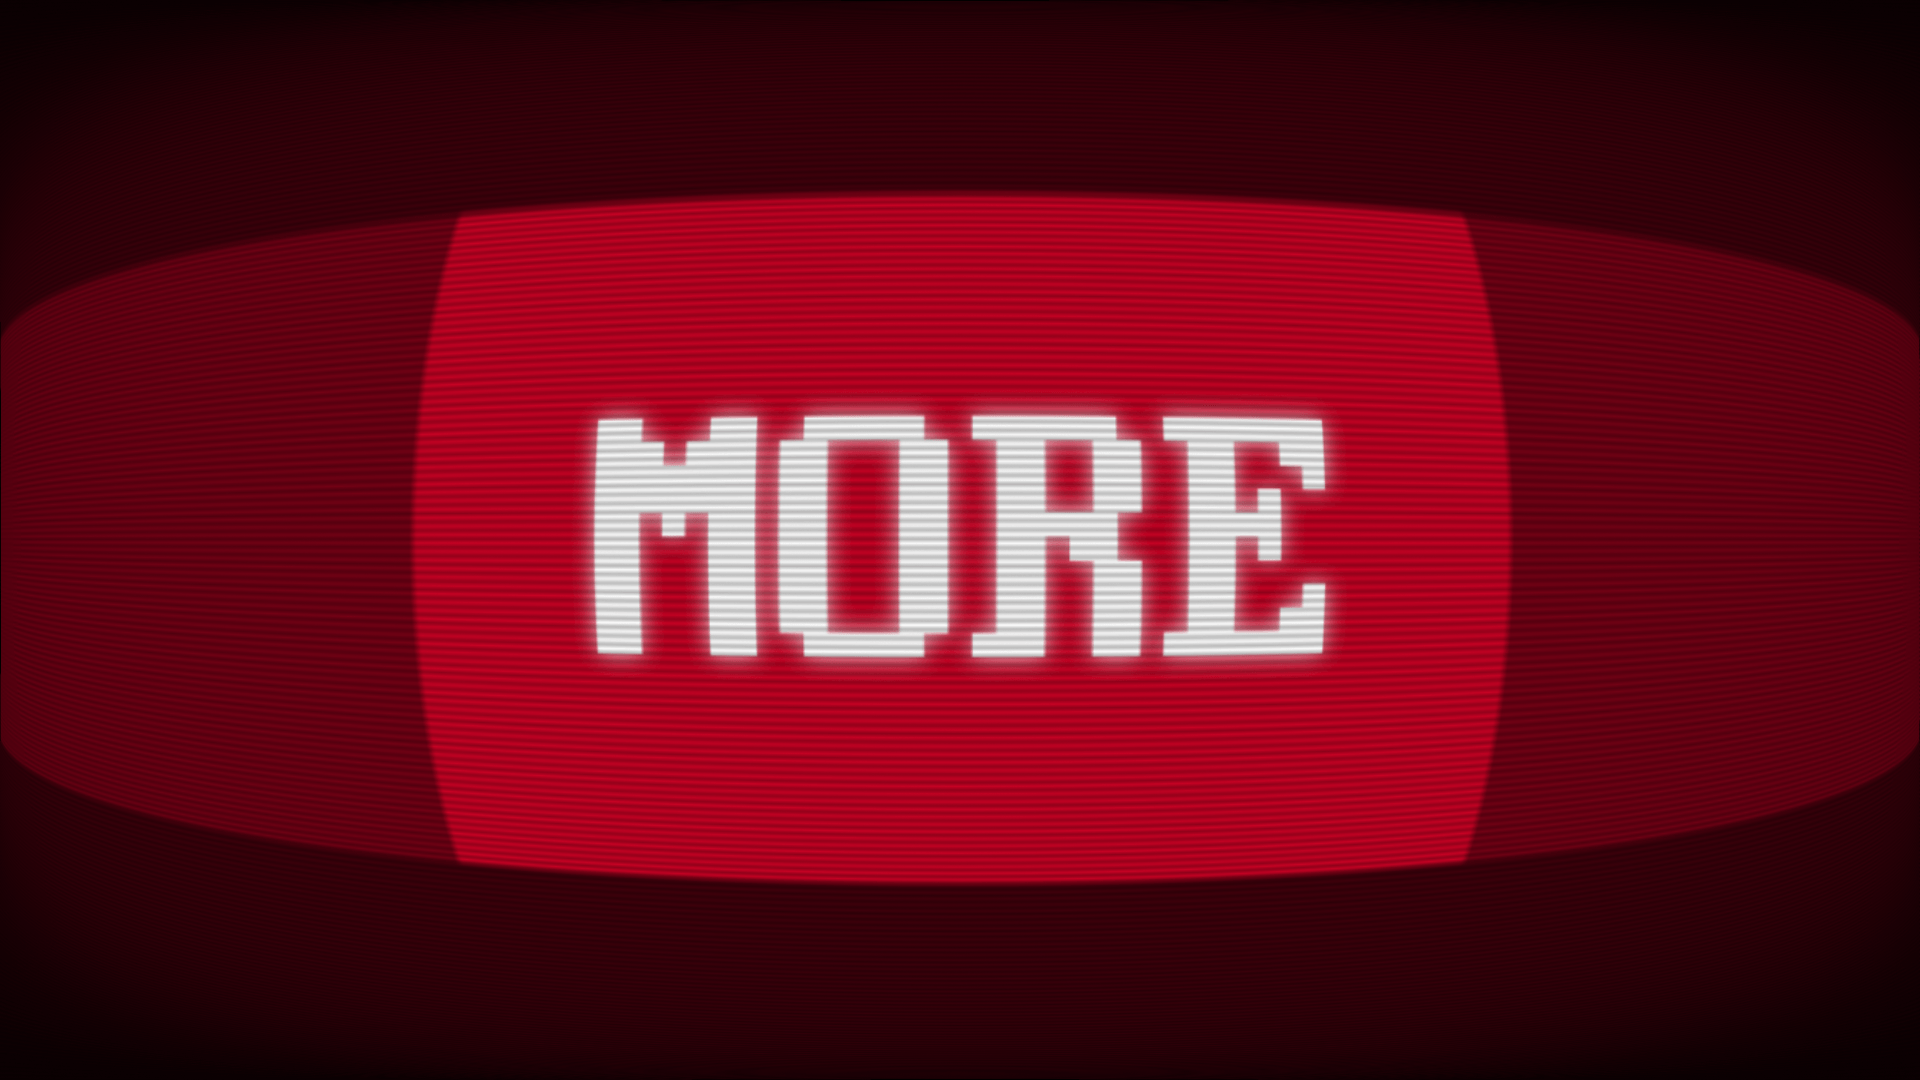 Icon for back for MORE